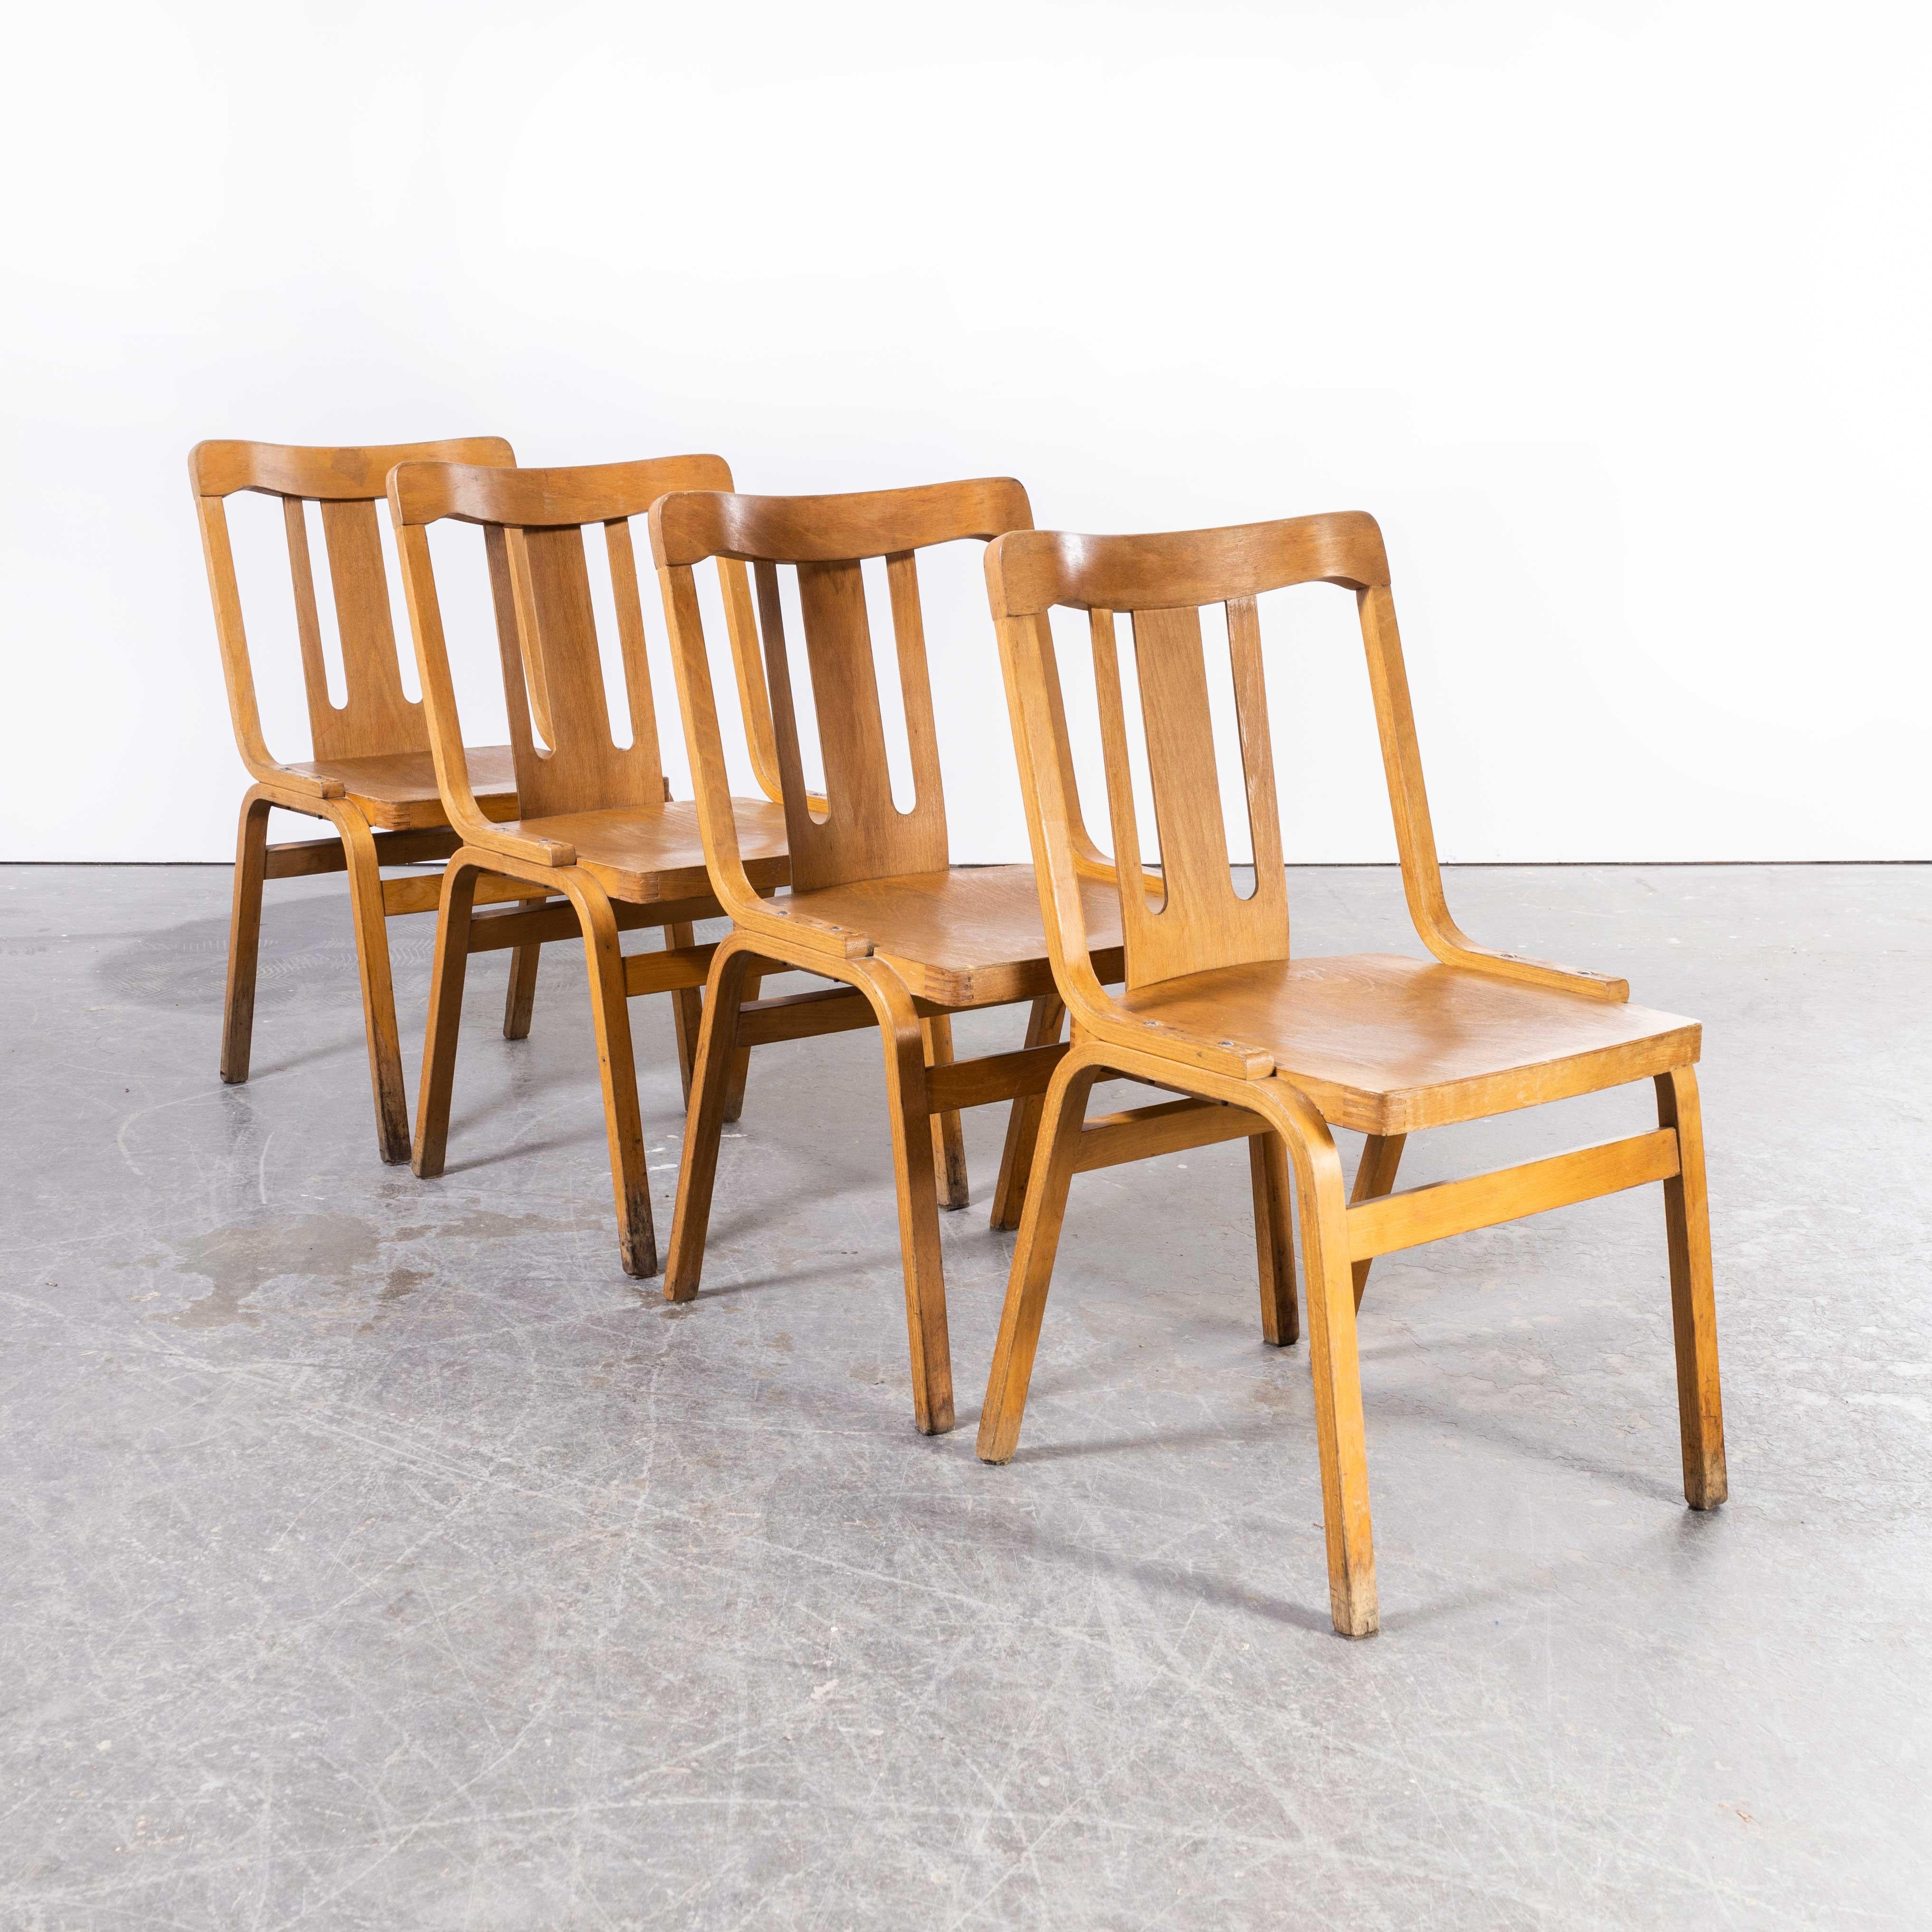 1960's Czech Bentwood Chapel Chairs - Set Of Four For Sale 4